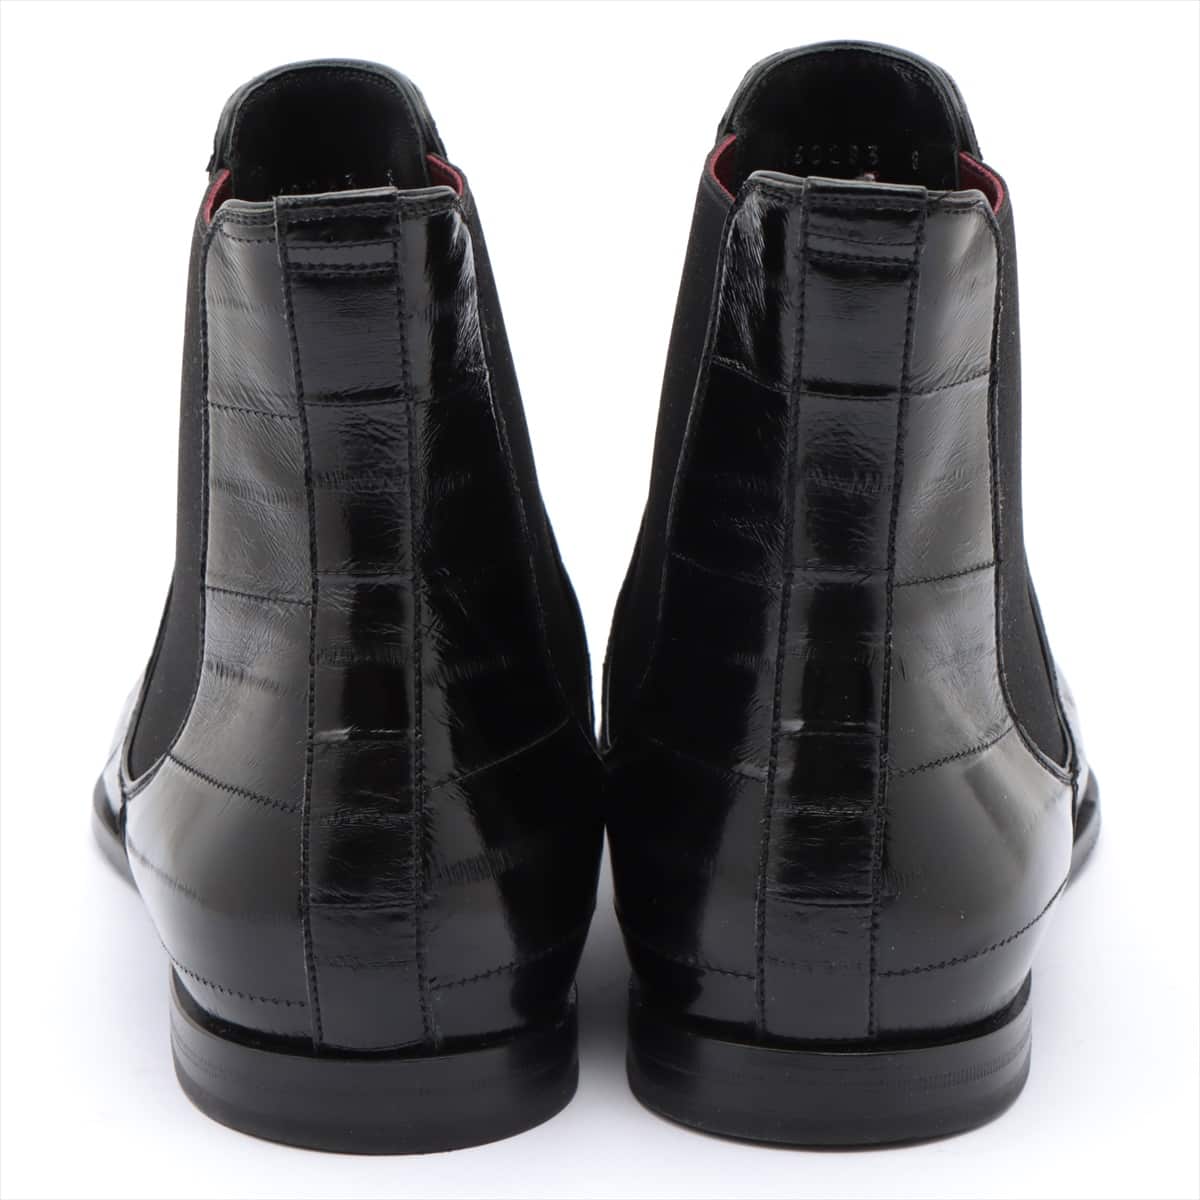 Dolce & Gabbana Leather Side Gore Boots 8 Men's Black